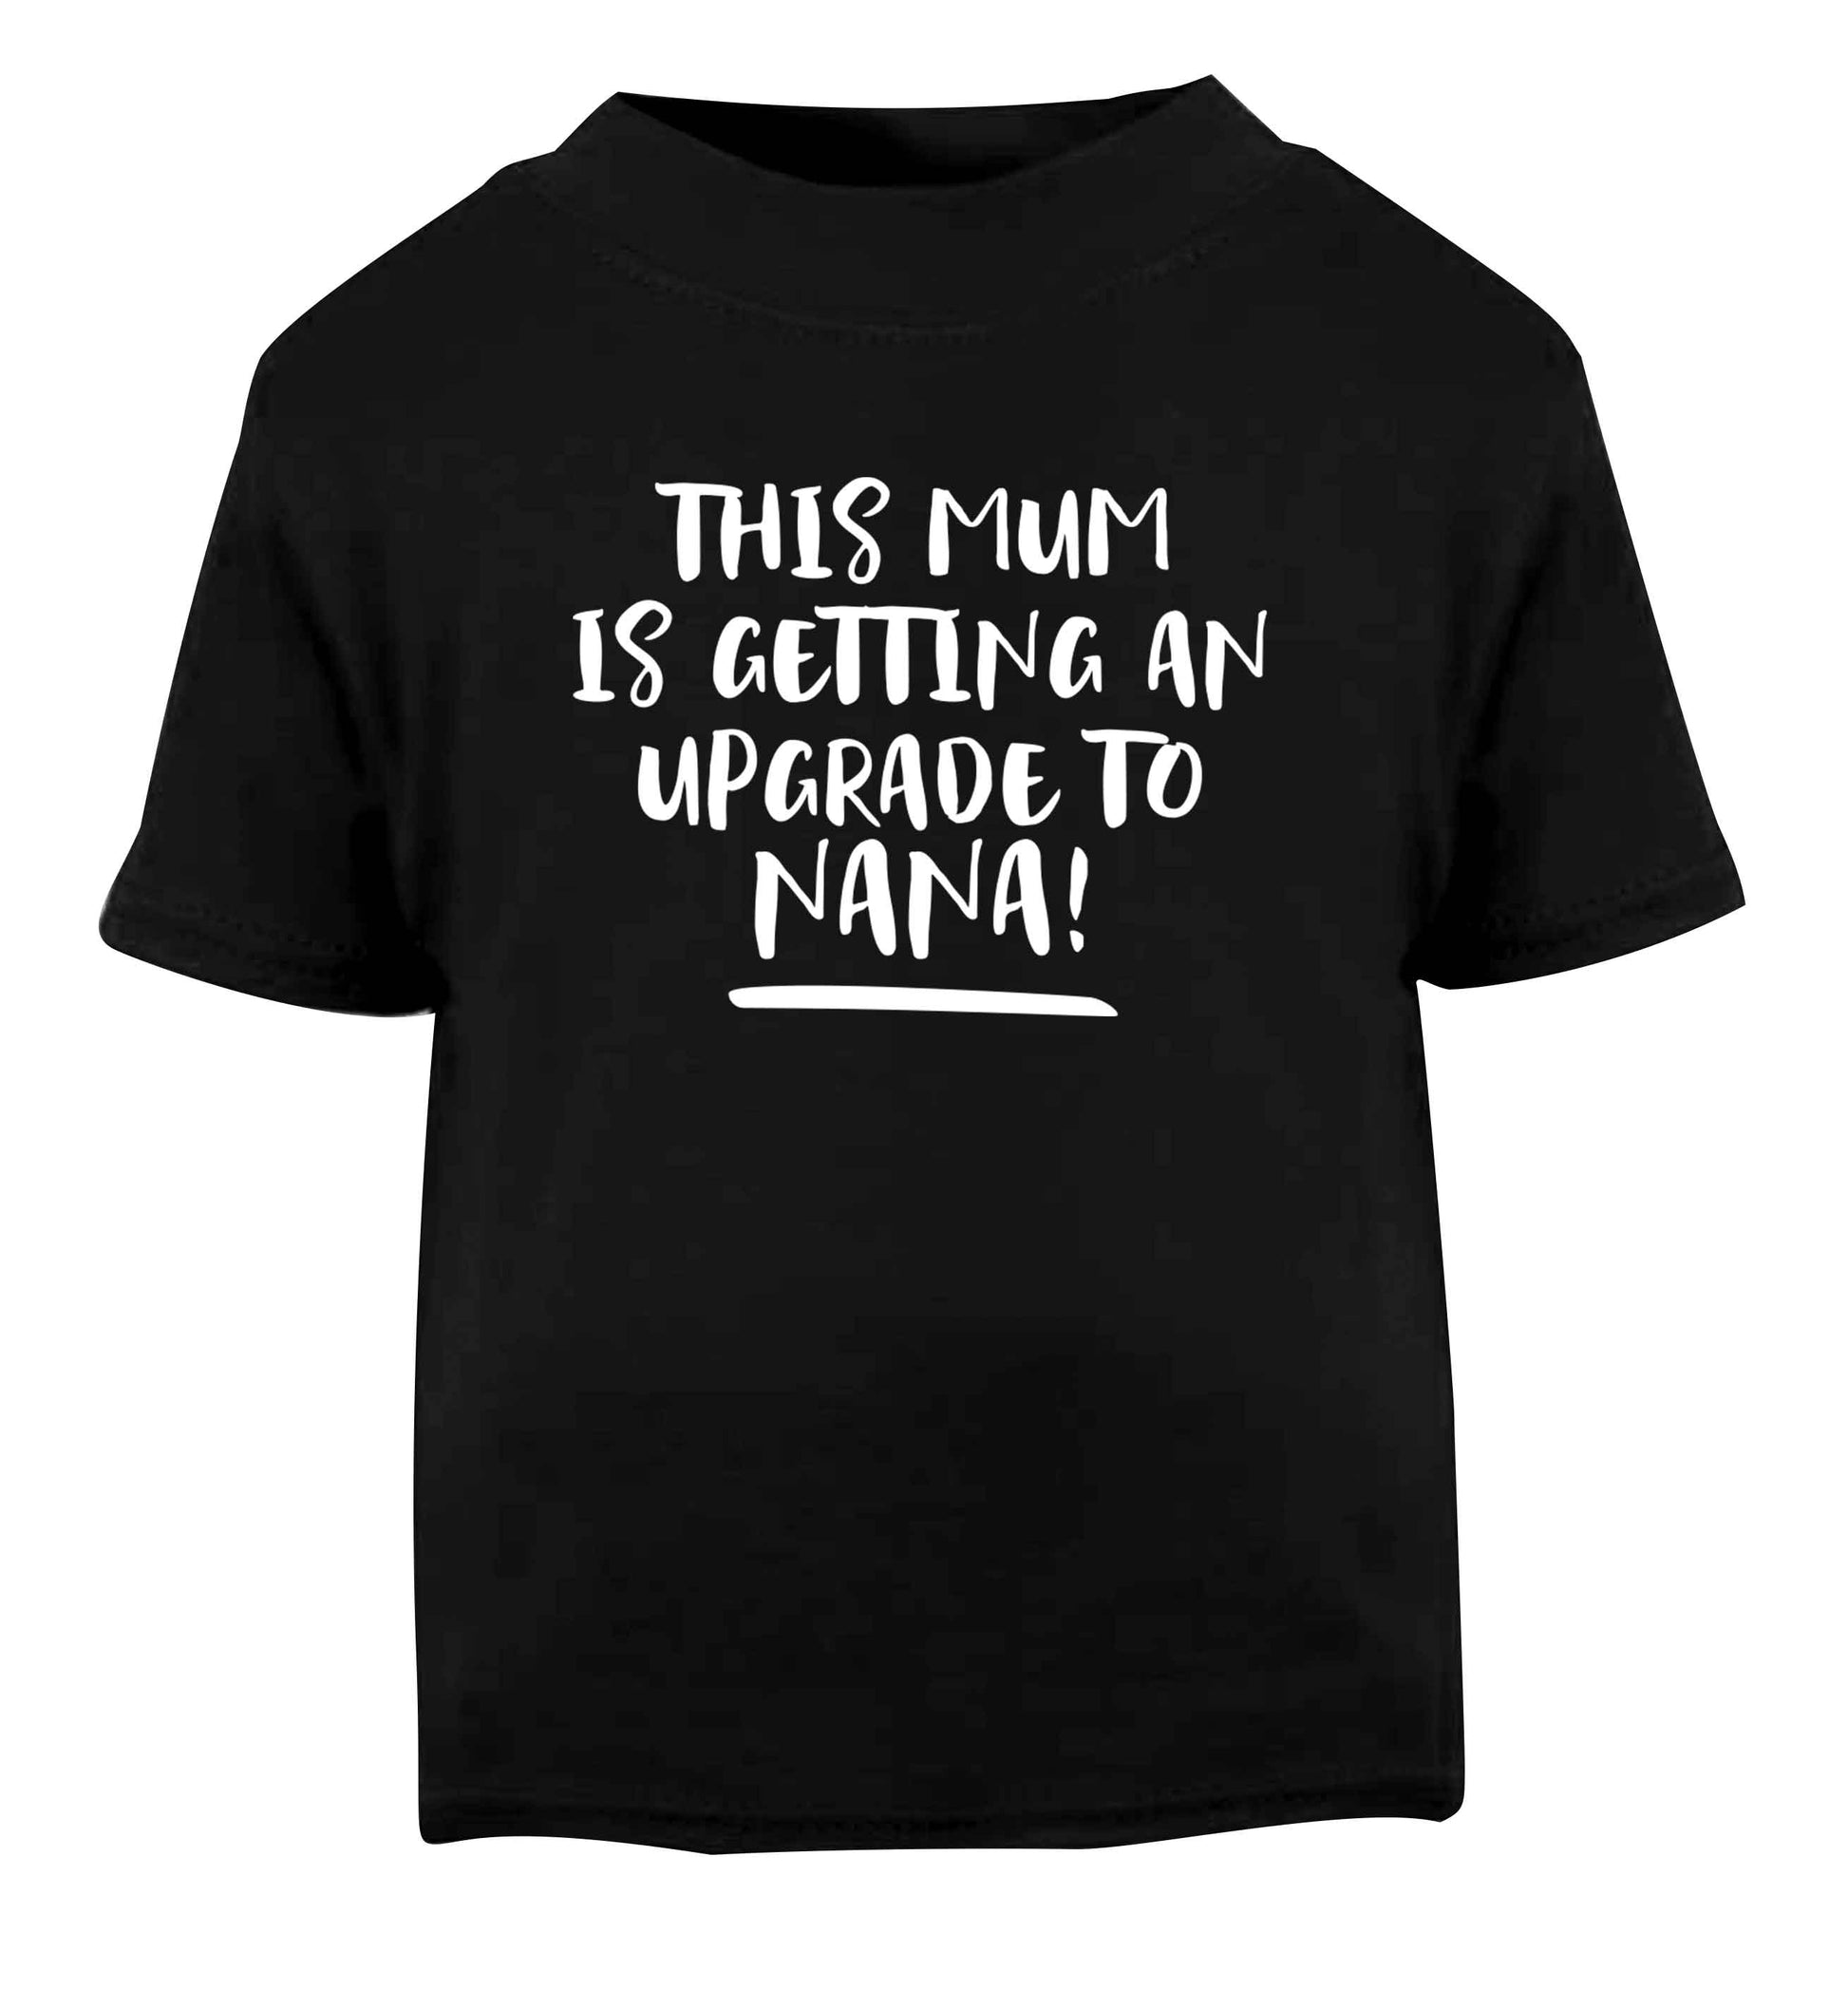 This mum is getting an upgrade to nana! Black Baby Toddler Tshirt 2 years